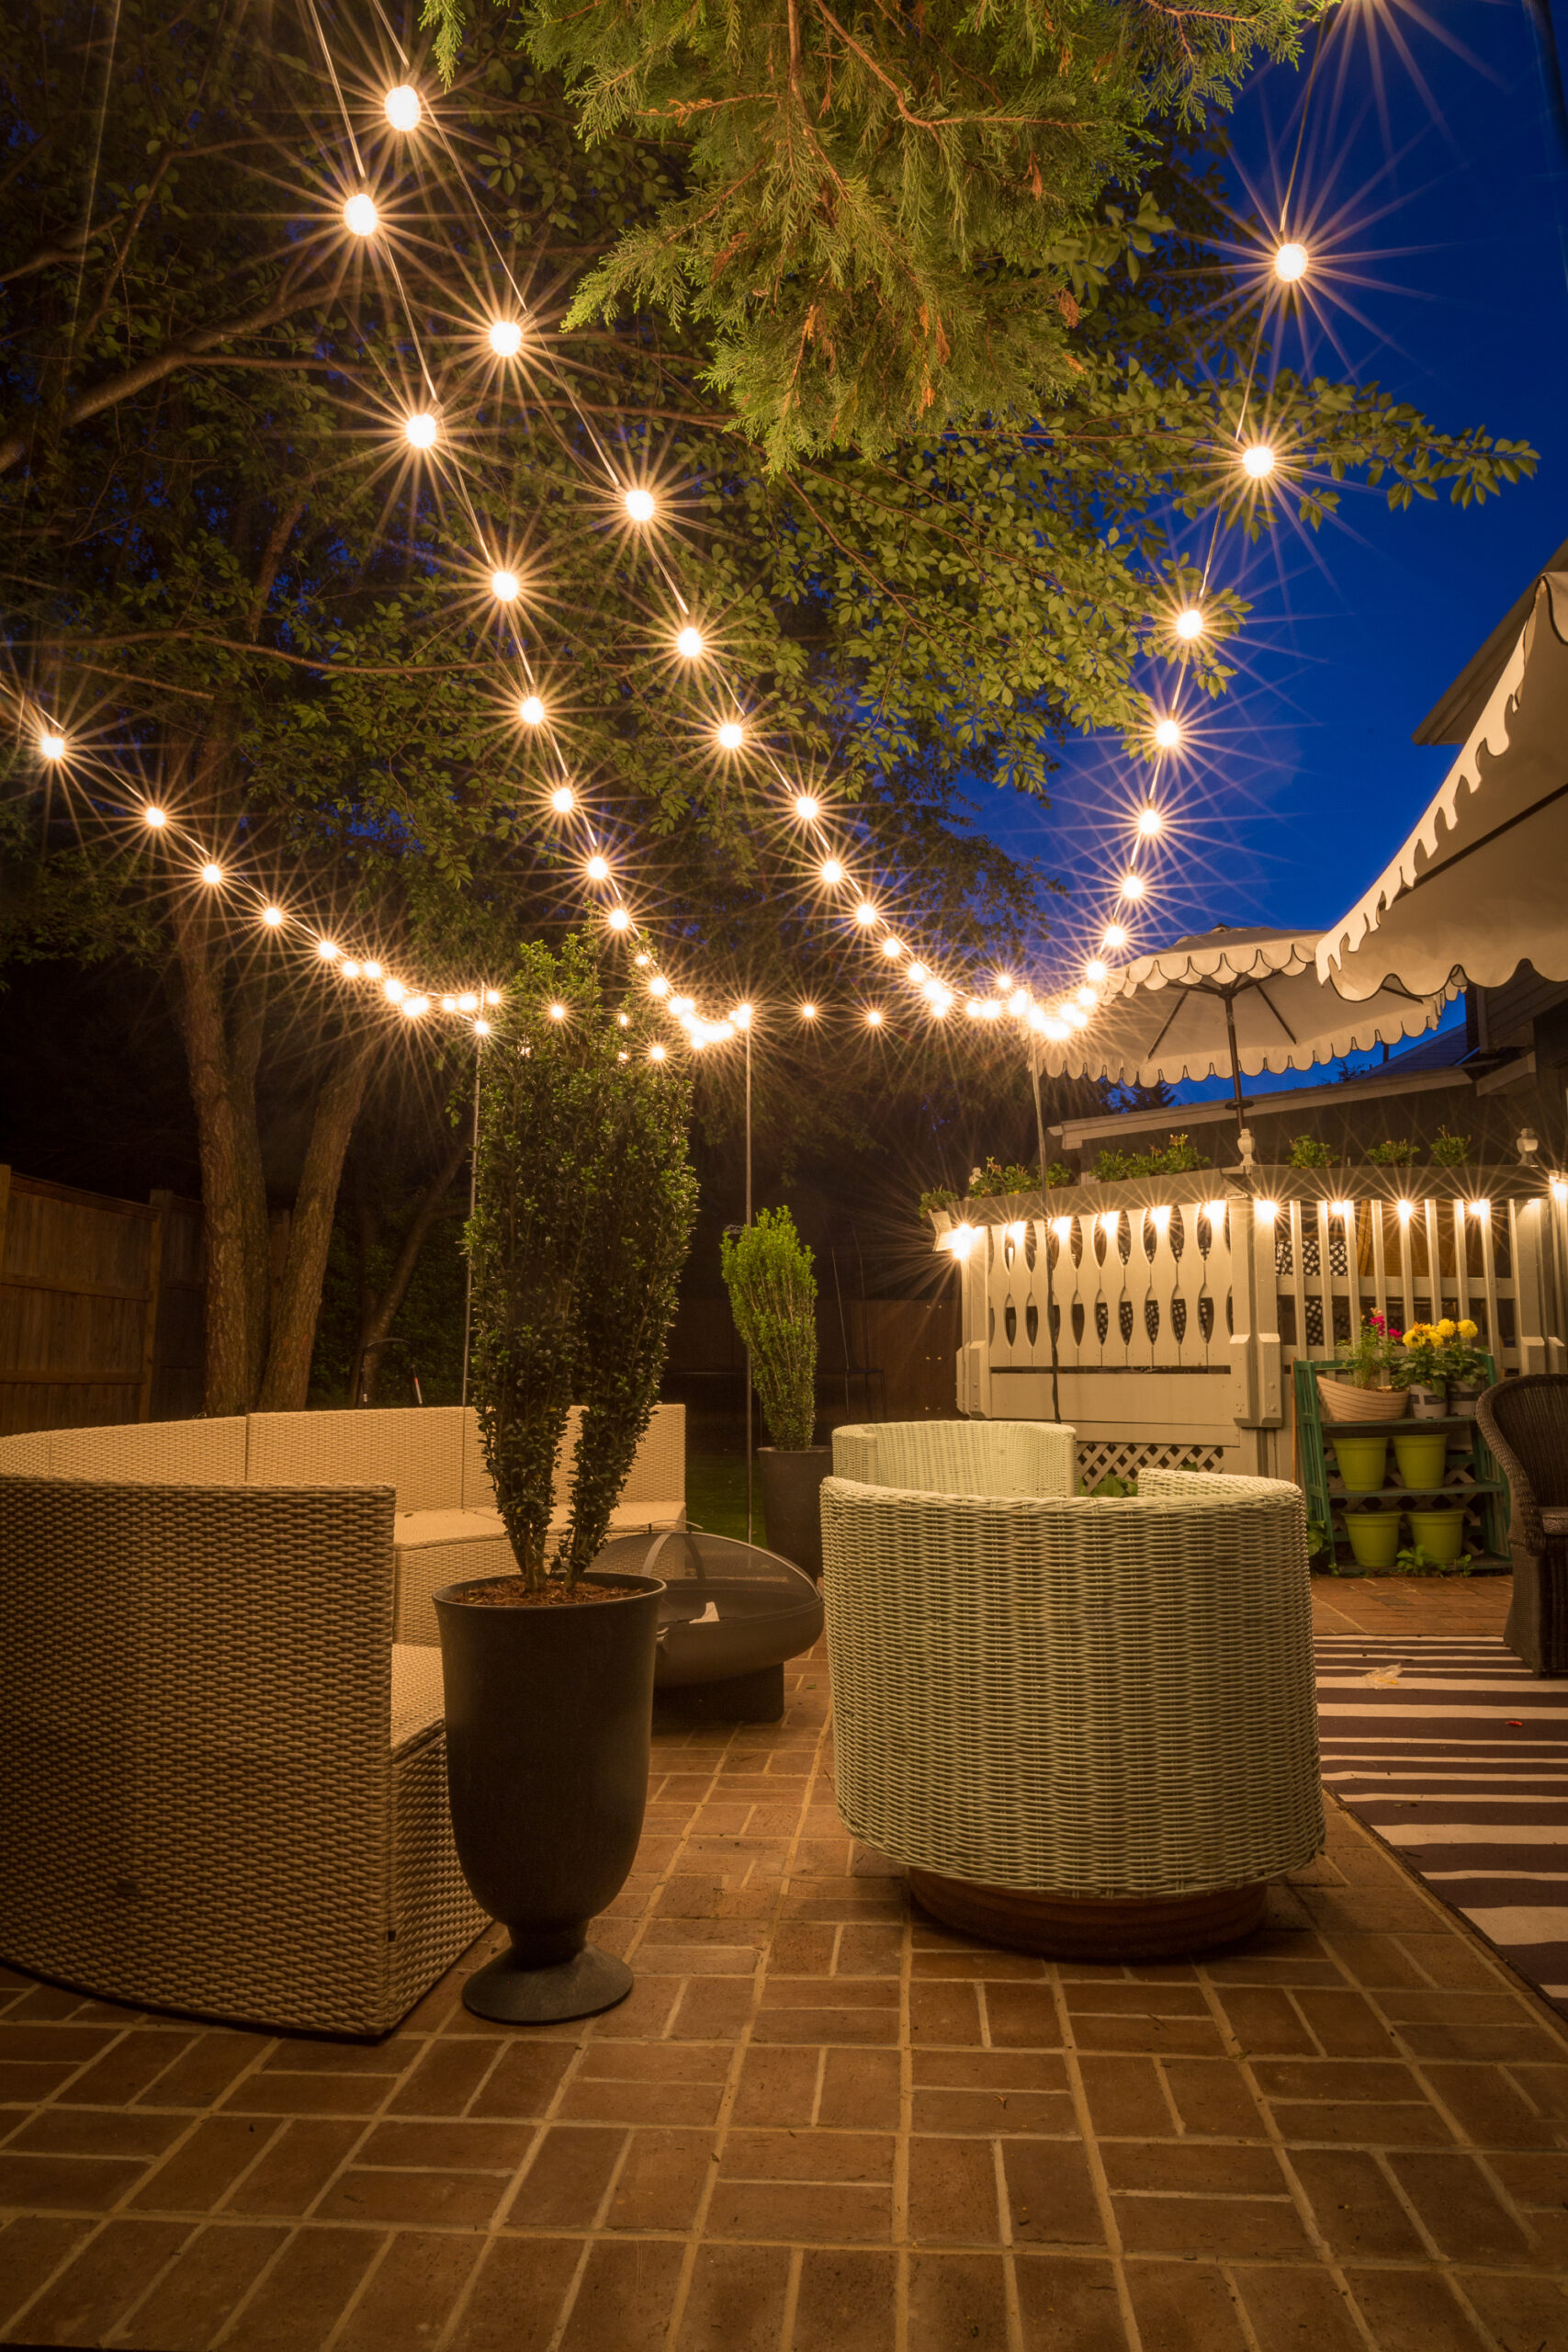 How to hang, backyard lighting, ideas, string lights, party lights, best fire pit, fire pit, outdoor entertaining,